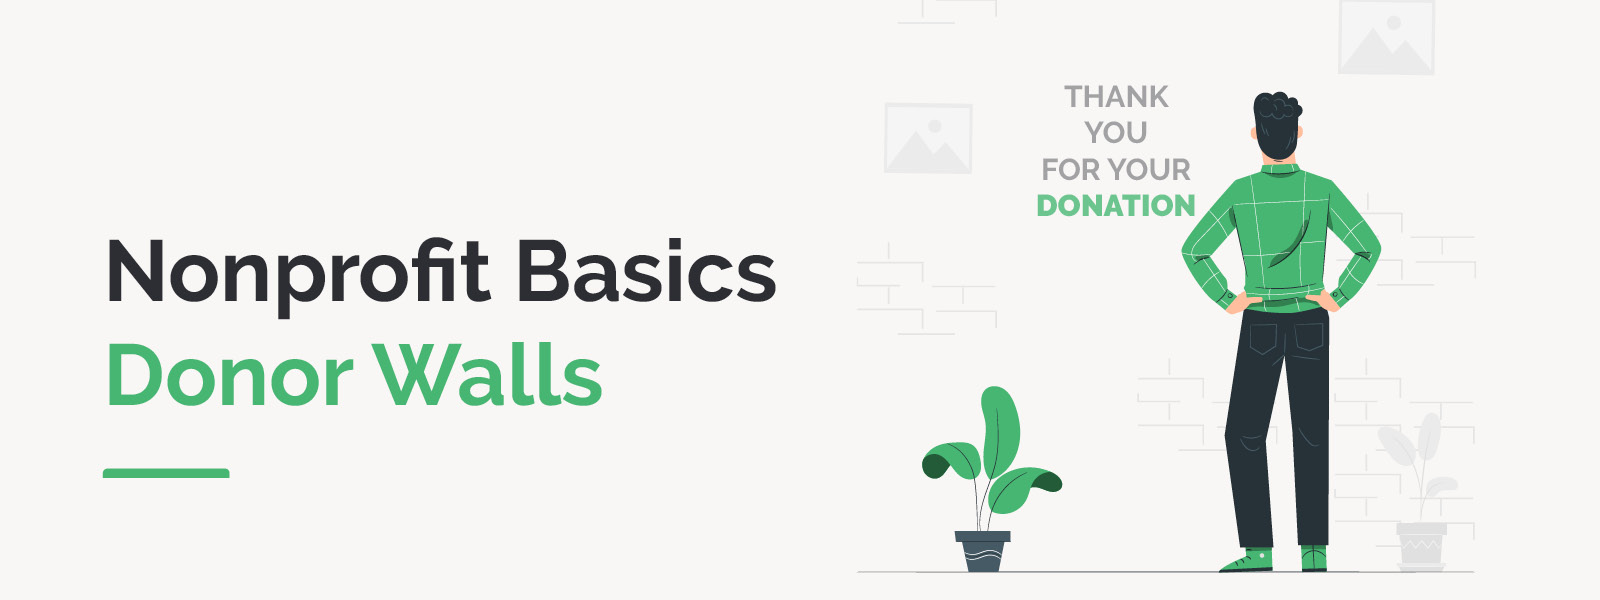 Learn more about how donor walls are useful for nonprofits.